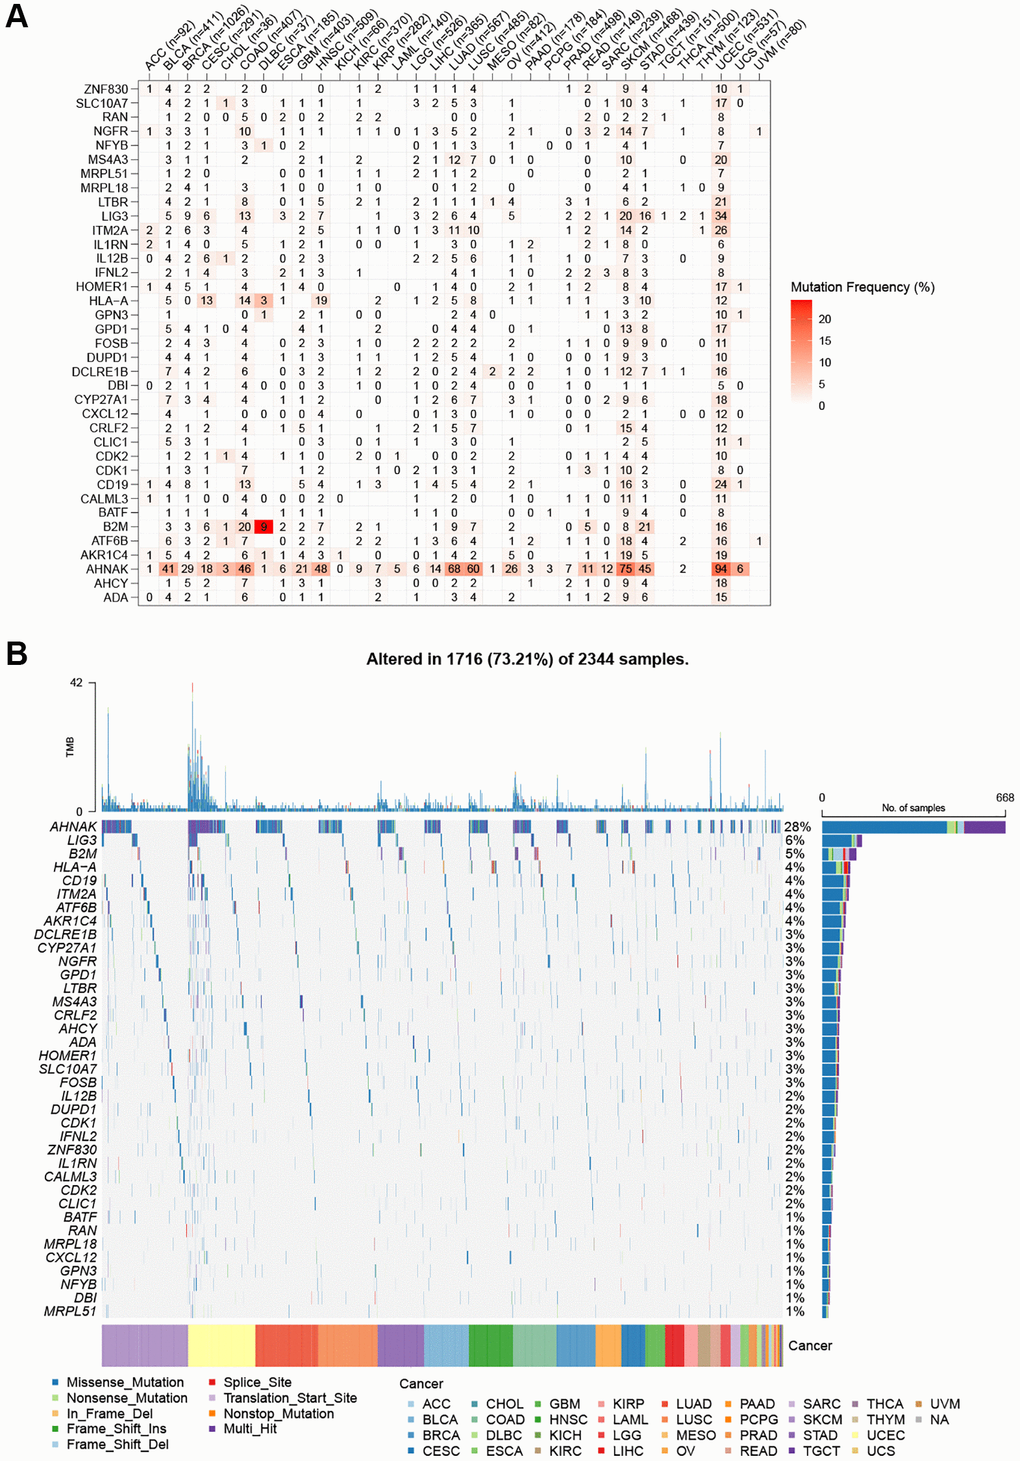 SNV frequency and variant types of T cell proliferation regulatory genes. (A) Mutation frequency of T cell proliferation regulatory genes. (B) SNV oncoplot. An oncoplot showing the mutation distribution of T cell proliferation regulatory genes and a classification of SNV types.